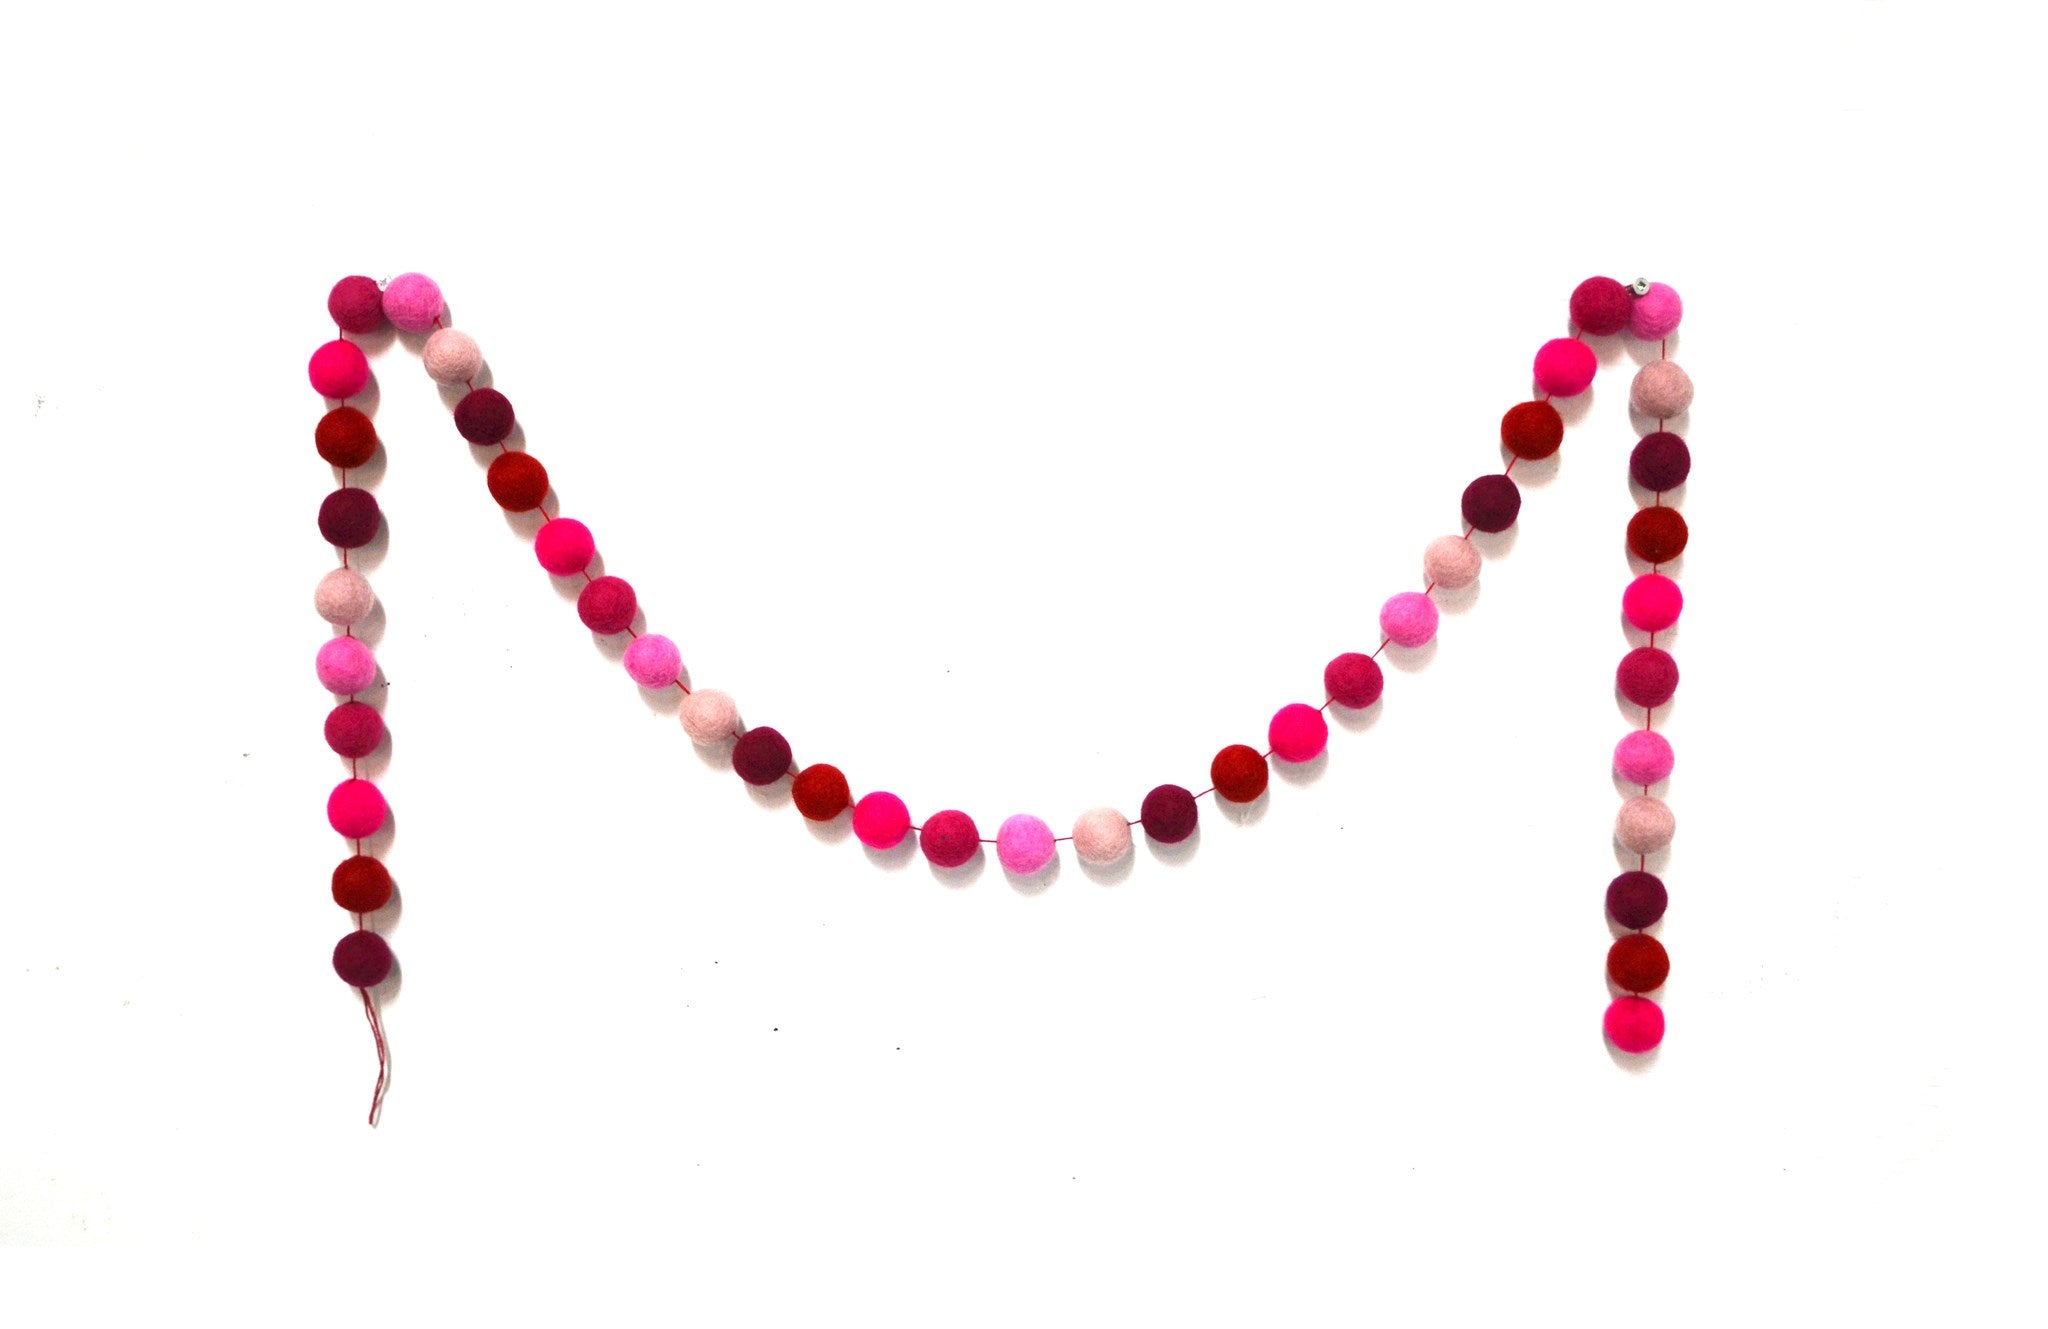 Felted Pink Ombre Ball Garland